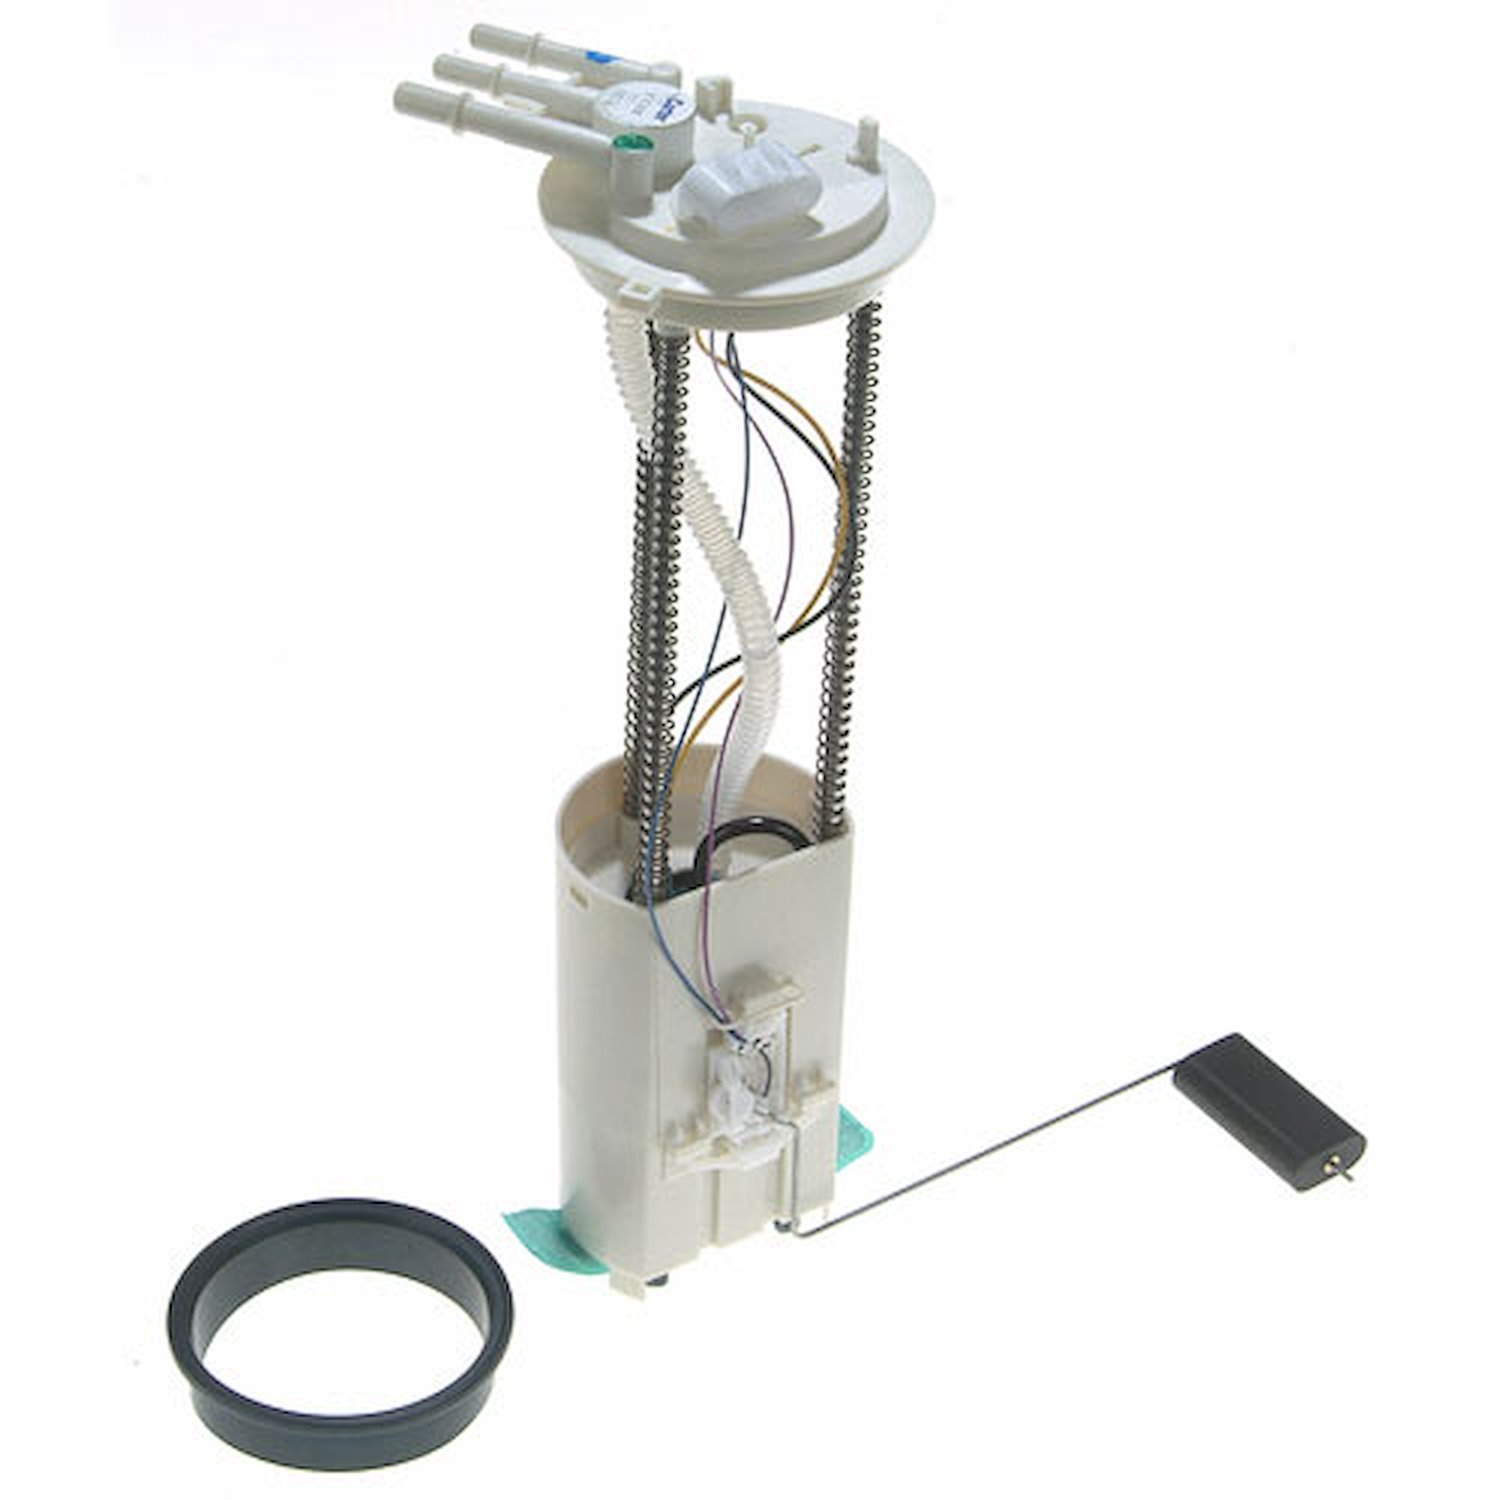 OE GM Replacement Electric Fuel Pump Module Assembly 2004 Chevrolet Silverado 1500 4.3L V6